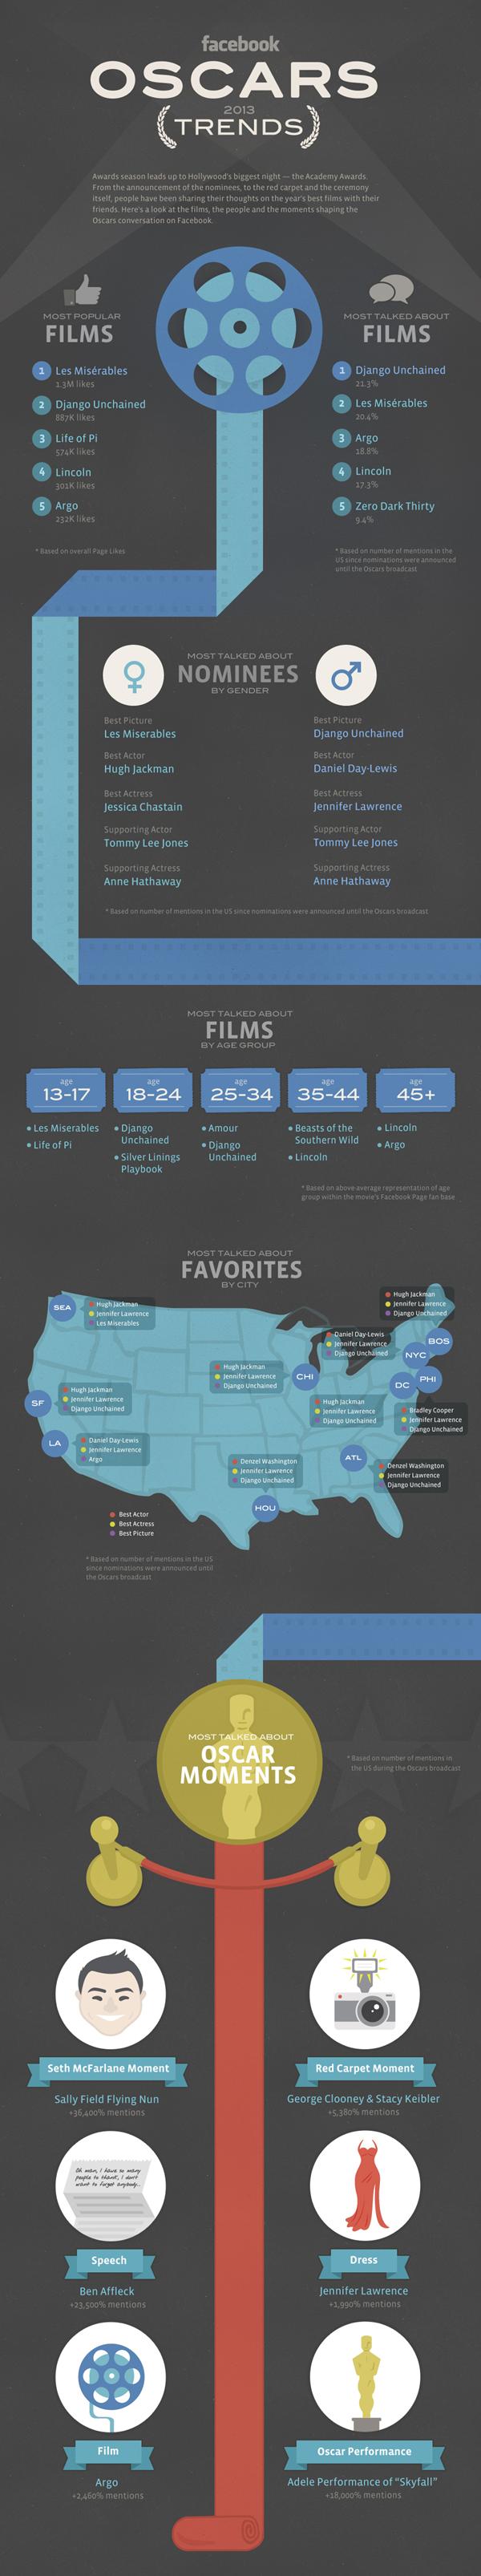 Oscars 2013 on Facebook-Infographic